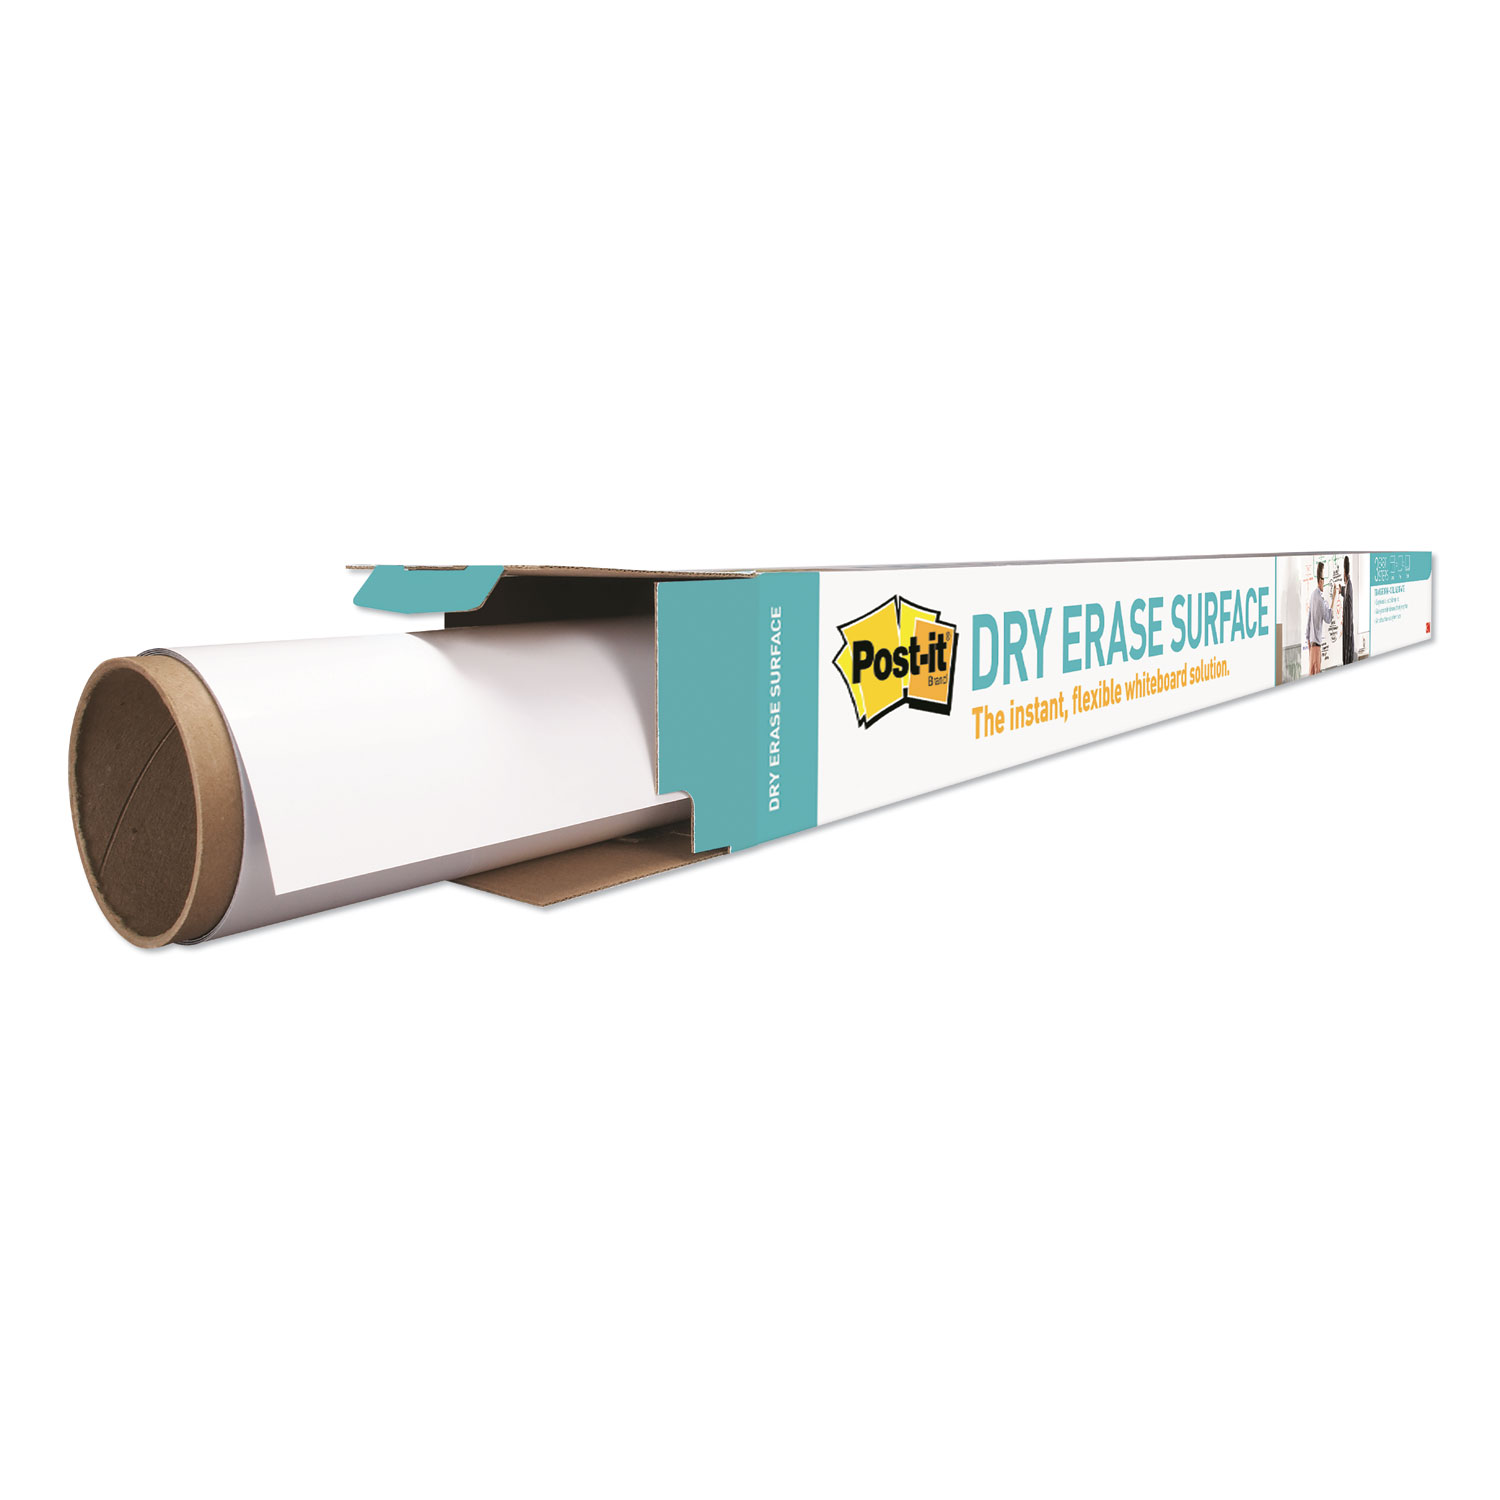  Post-it DEF4X3 Dry Erase Surface with Adhesive Backing, 48 x 36, White (MMMDEF4X3) 